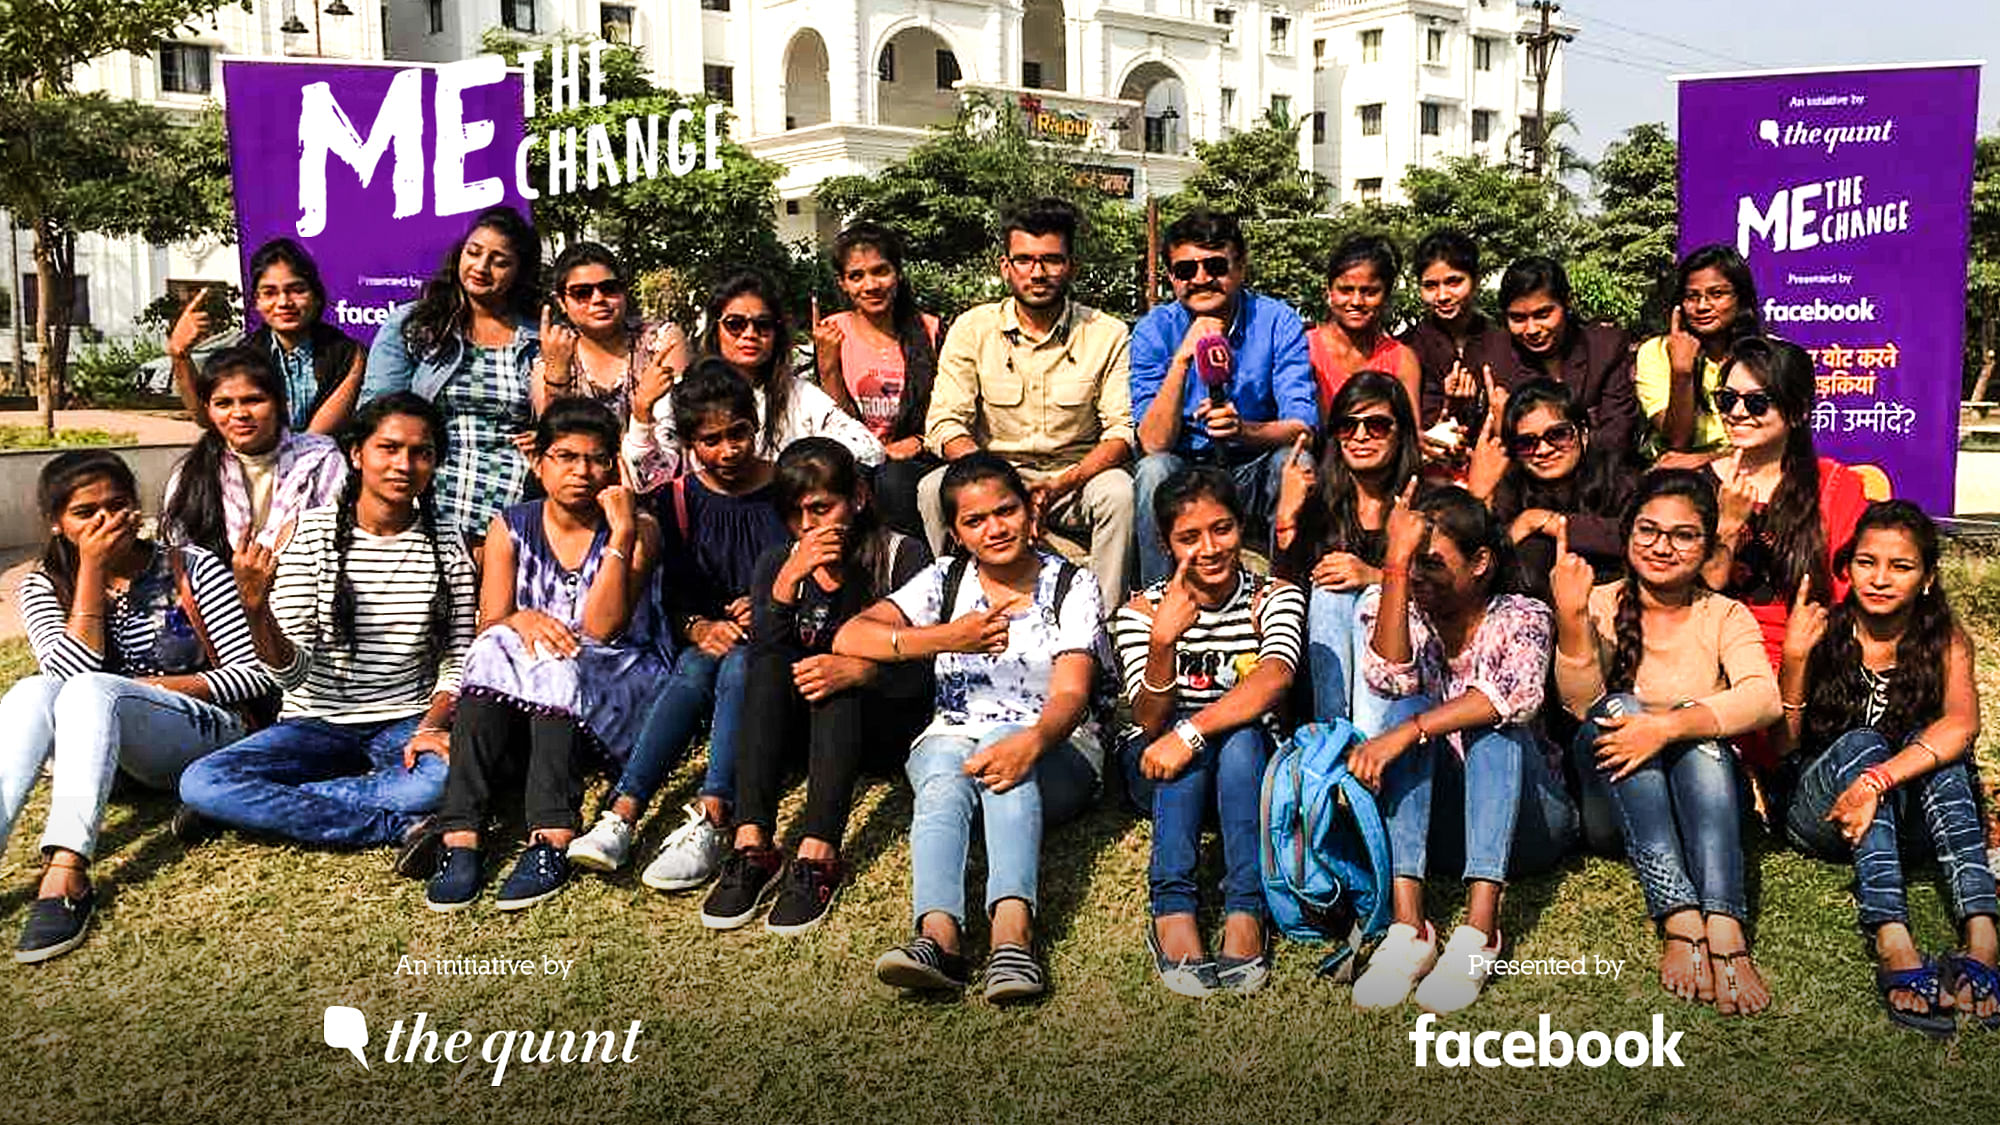 We spoke to 23 students in Raipur, Chhattisgarh to understand what their demands are this election.